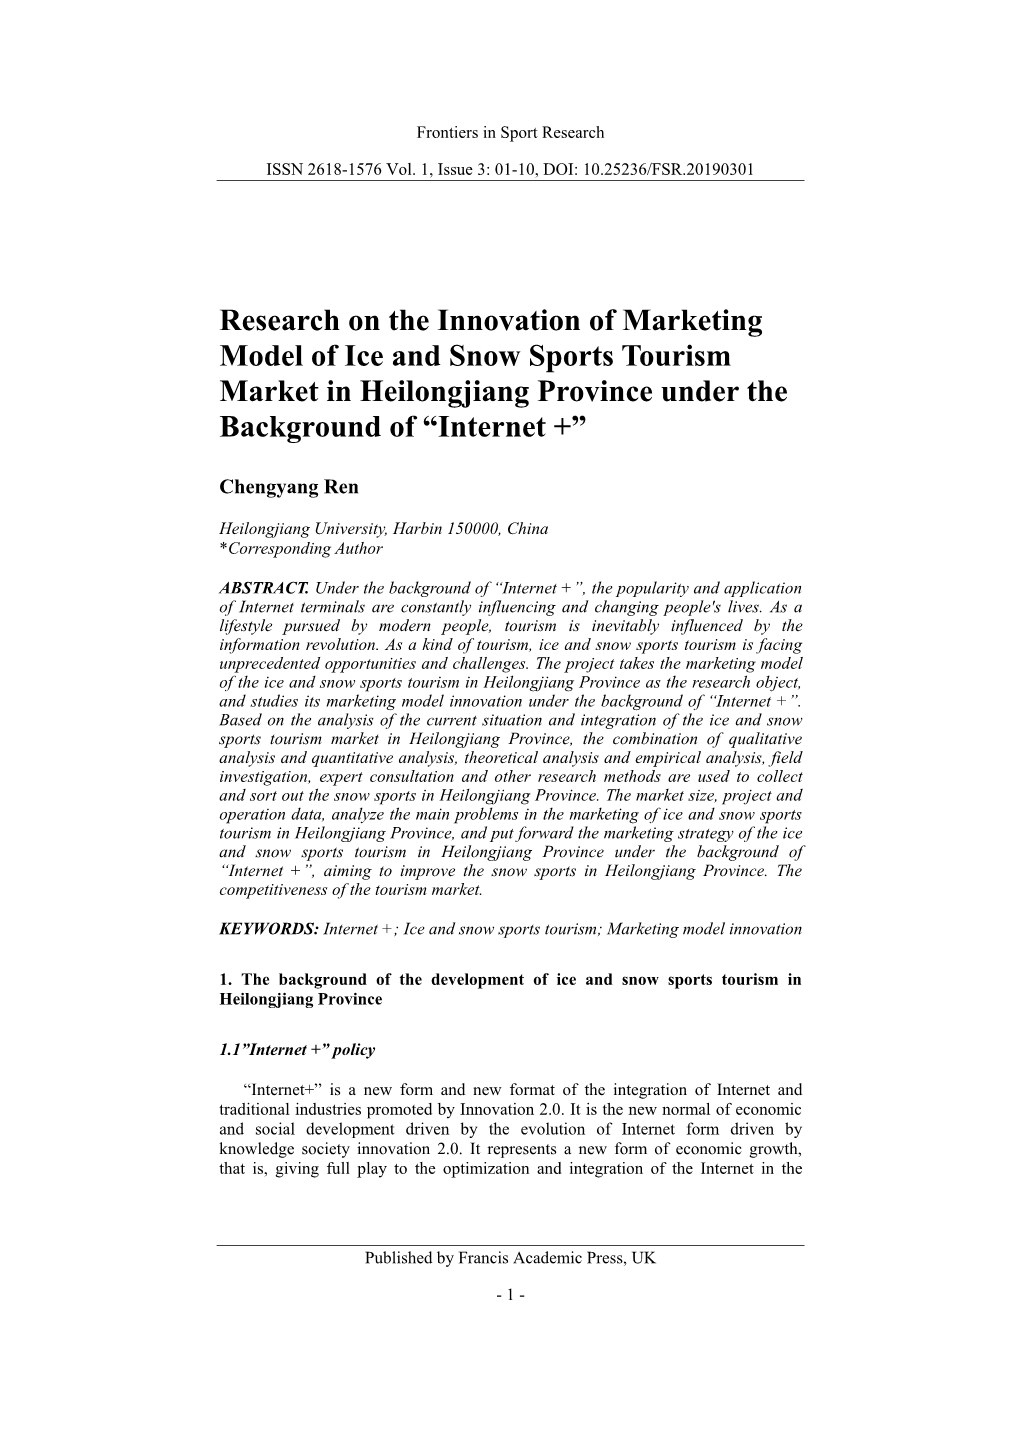 Research on the Innovation of Marketing Model of Ice and Snow Sports Tourism Market in Heilongjiang Province Under the Background of “Internet +”